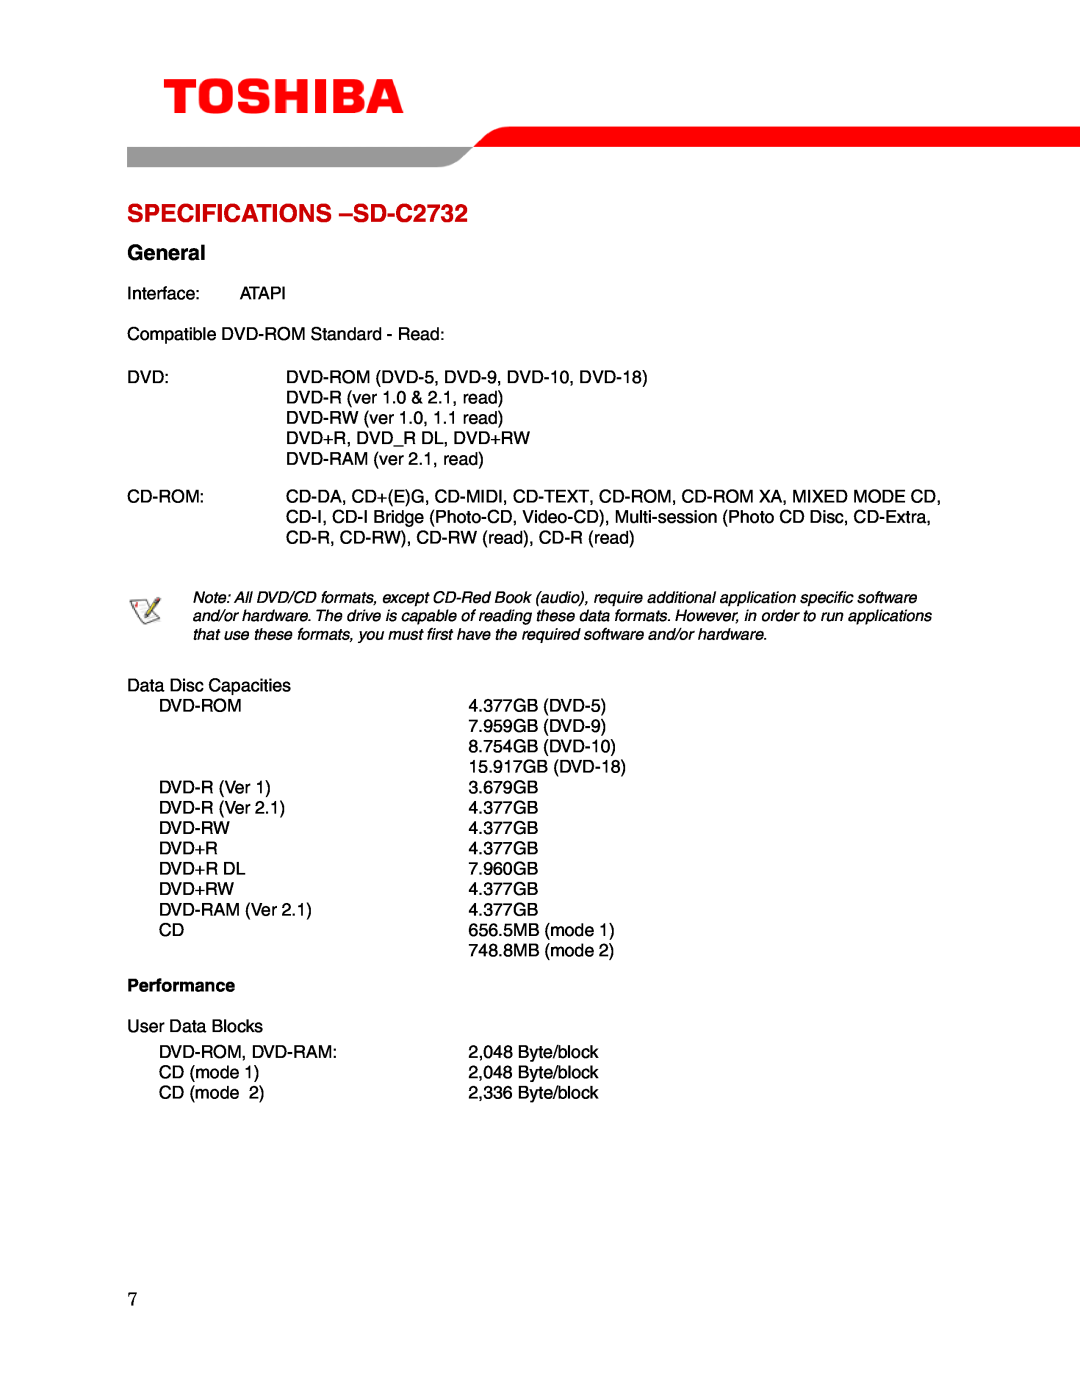 Toshiba user manual SPECIFICATIONS -SD-C2732, General, Performance 